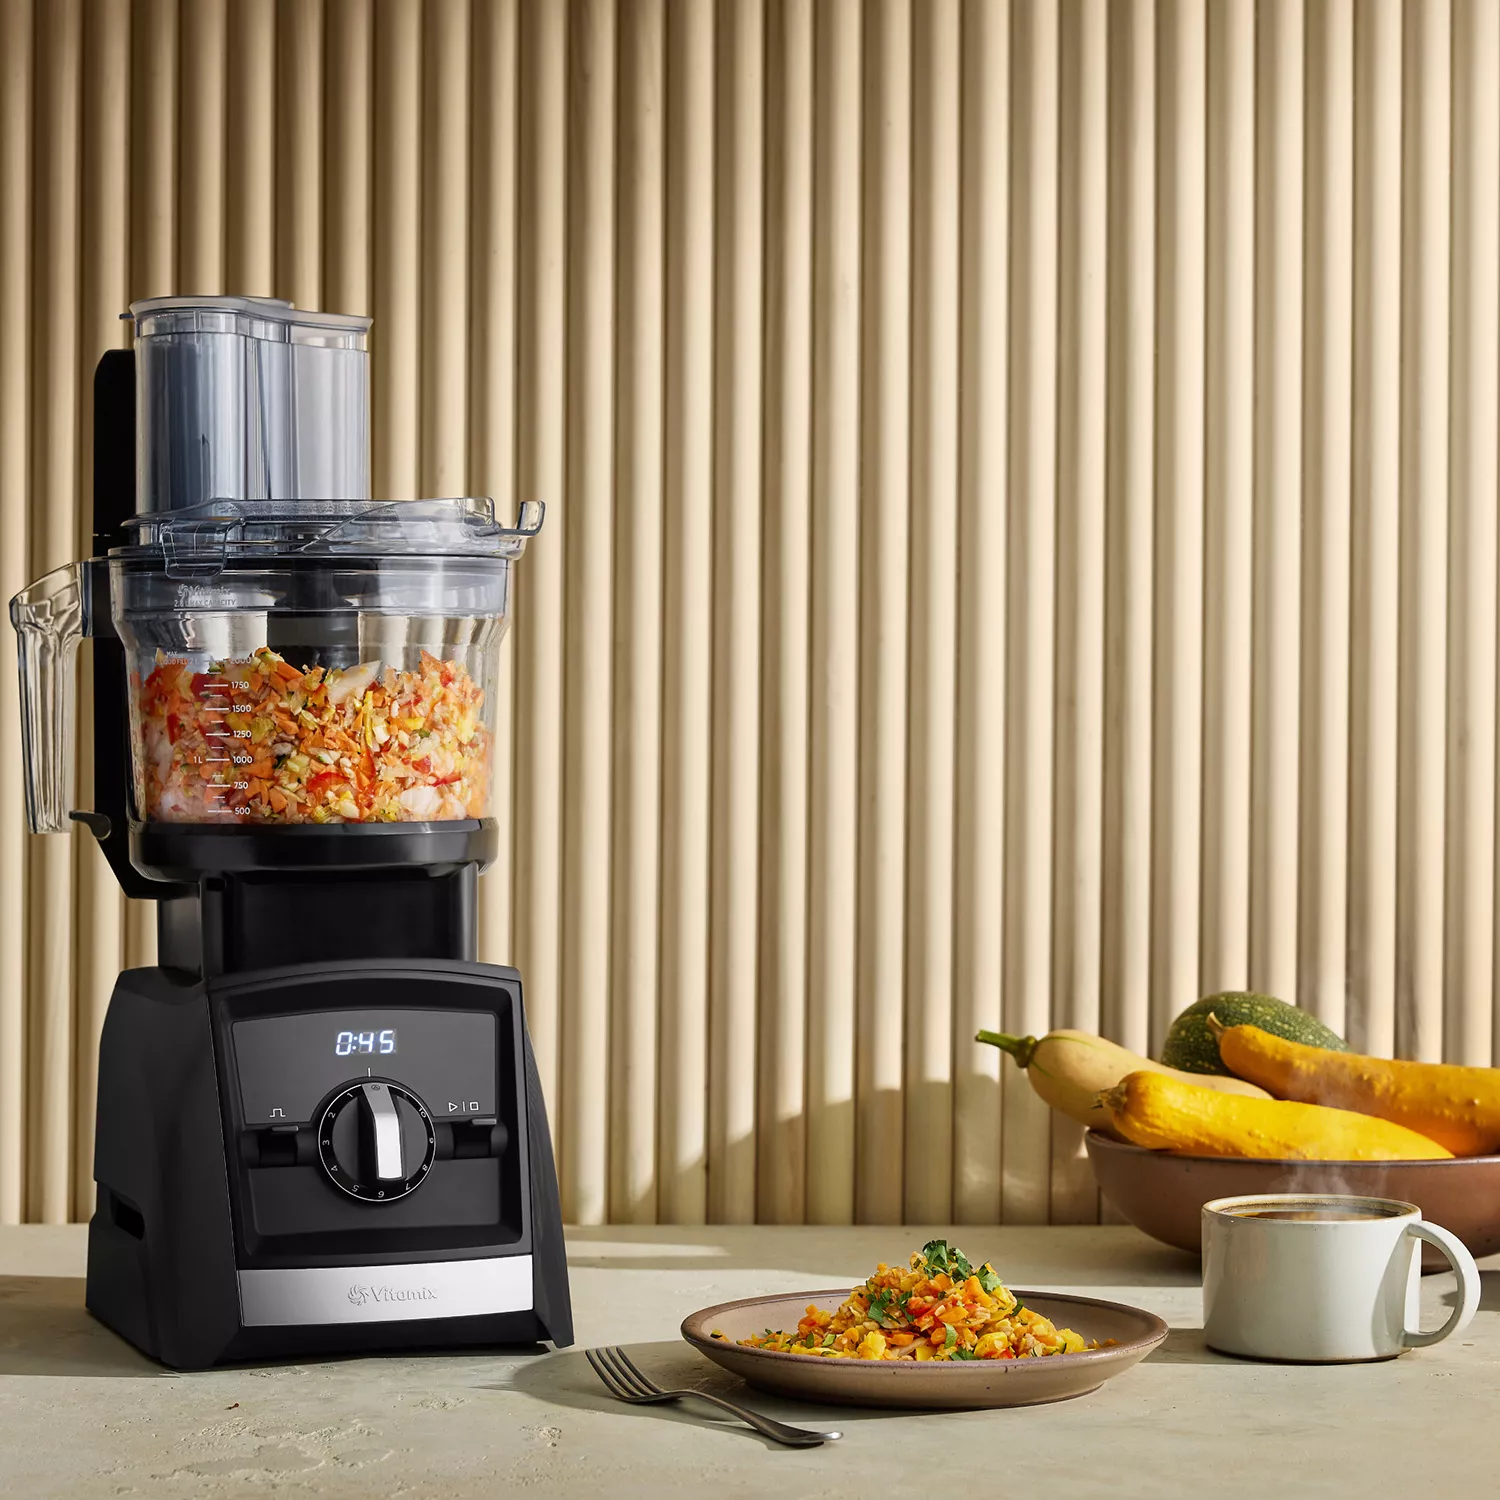 This Vitamix Blender Is on Sale for $260 Off—But Only for 2 Days